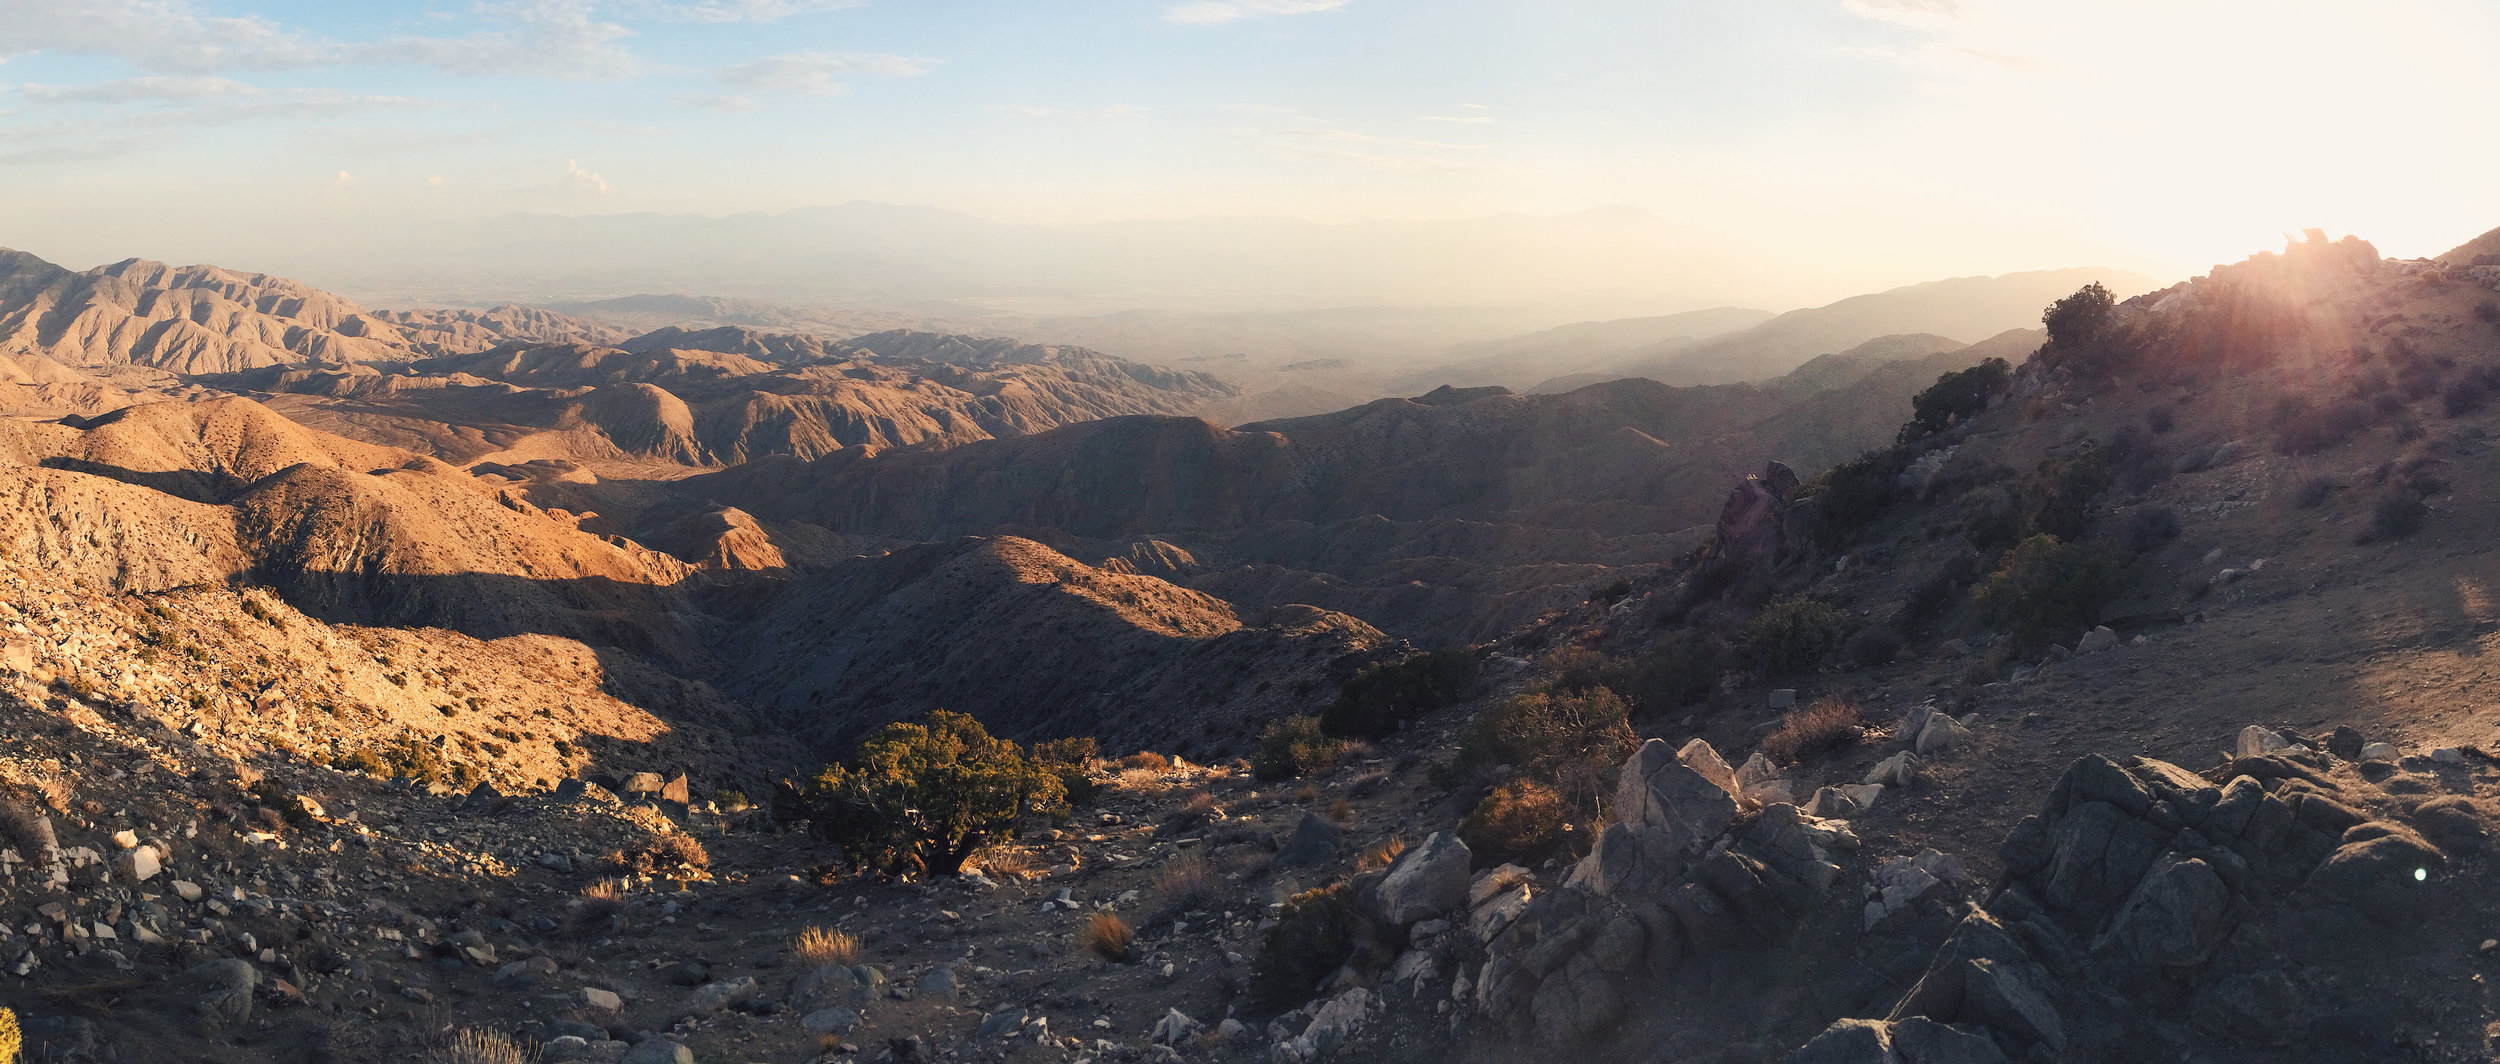 The view of Coachella Valley and the San Andreas Fault from a crest on the Little San Bernardino Mountains (called Key’s View) inside the Joshua Tree National Park